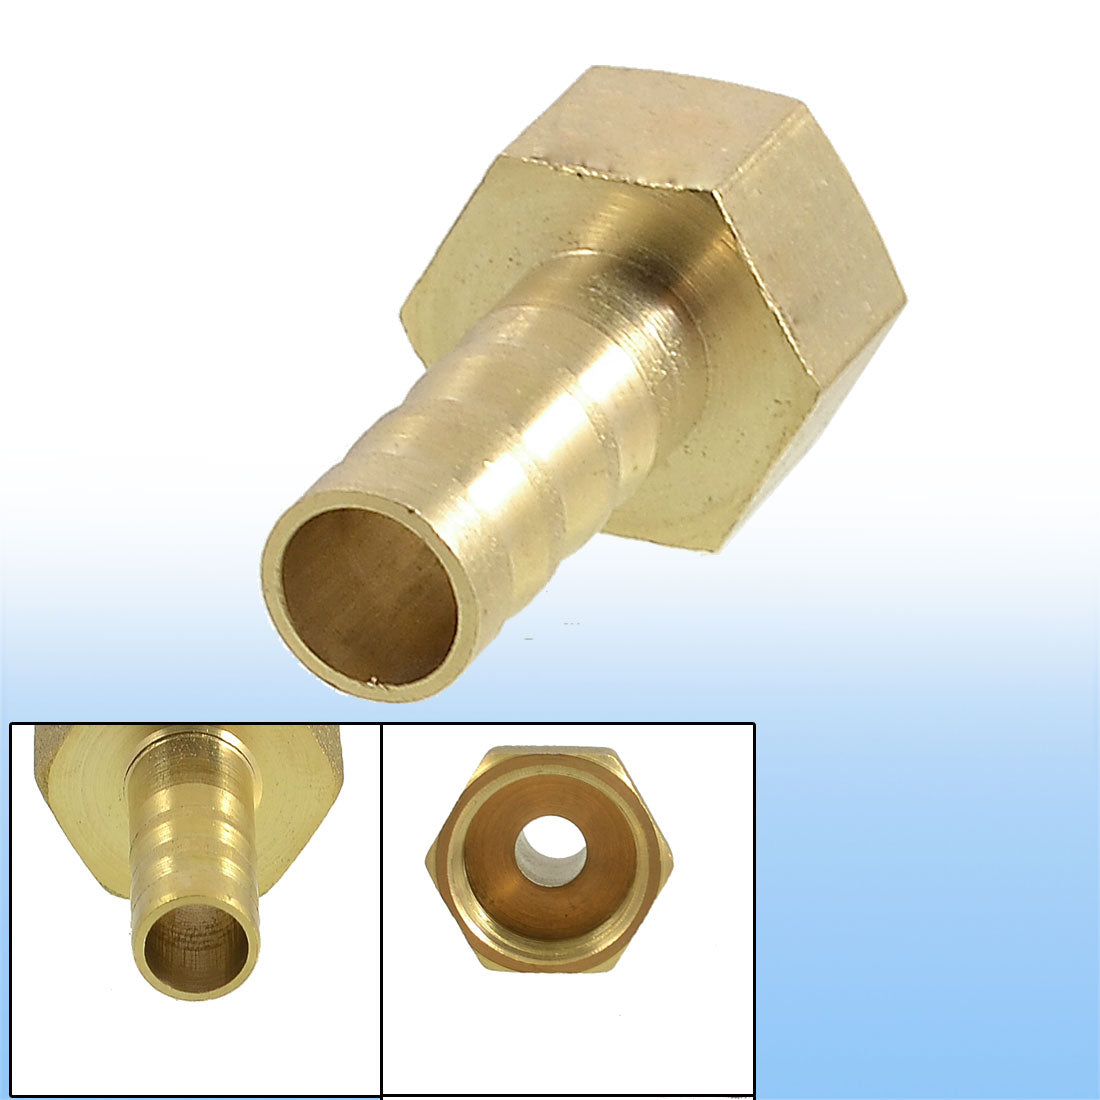 uxcell Uxcell Pneumatic Fitting 1/4BSPT Female Thread Hose Dia Brass Tubing Connector Adapter